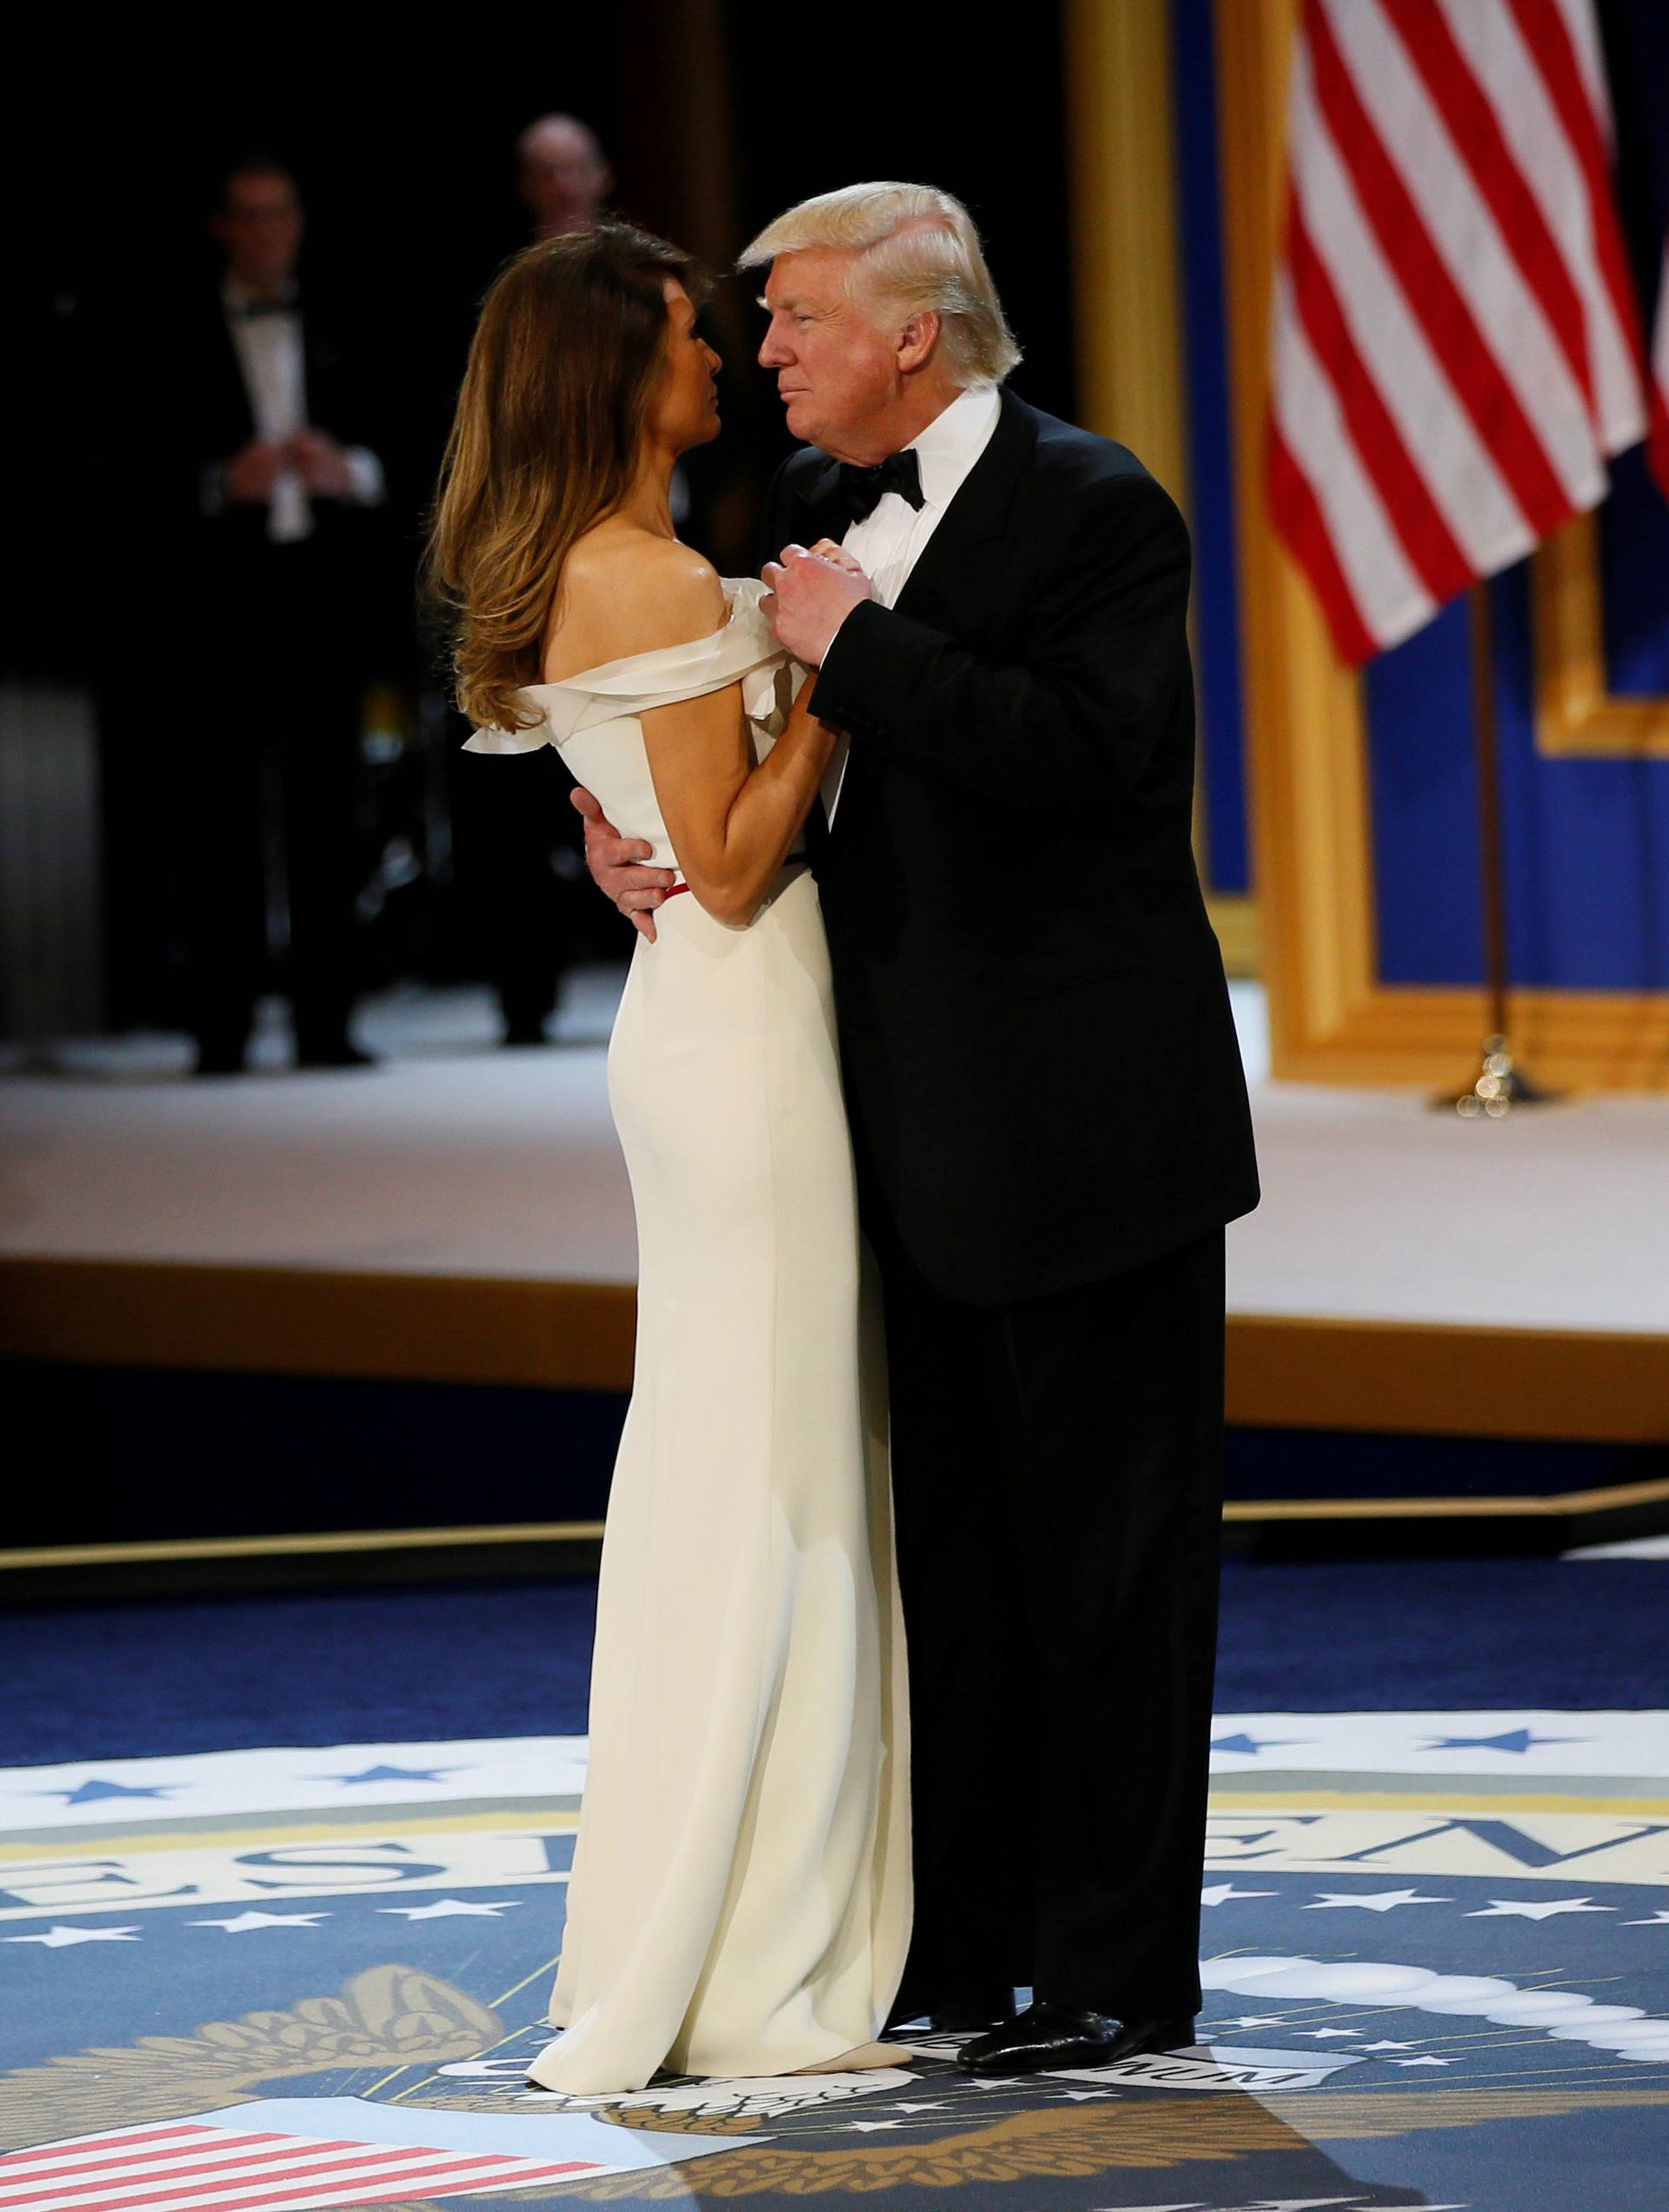 U.S. President Donald Trump and his wife first lady Melania Trump dance at the "Salute to Our Armed Forces" inaugural ball during inauguration festivities in Washington